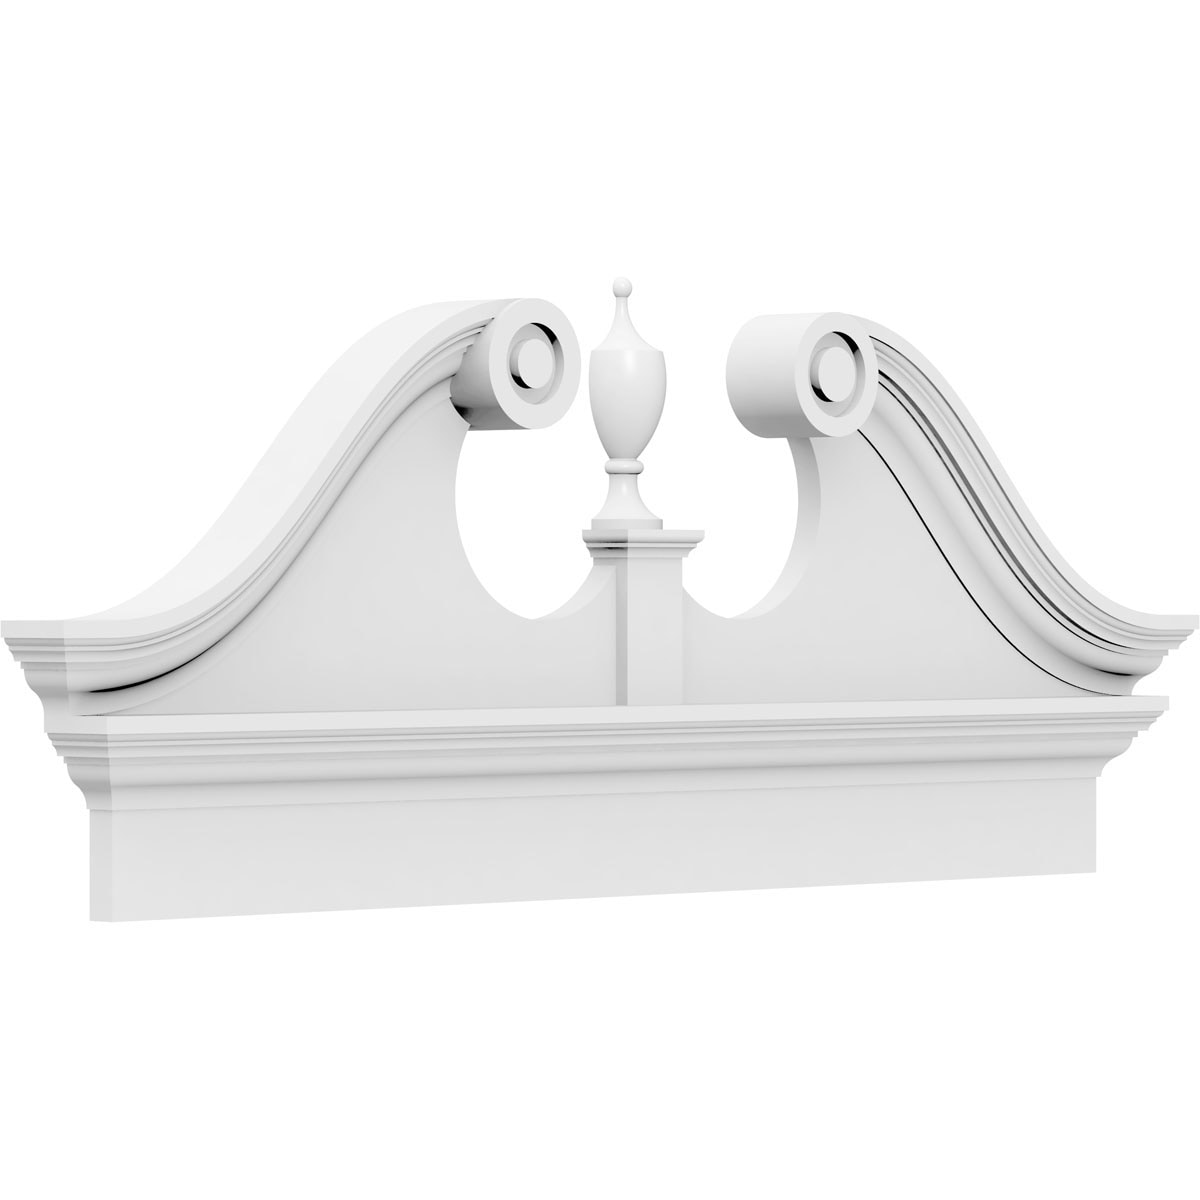 Ekena Millwork Rams Head 52-in x 19-7/8-in Unfinished PVC Pediment Entry Door Casing Accent in White | PEDPC052X200RHP00